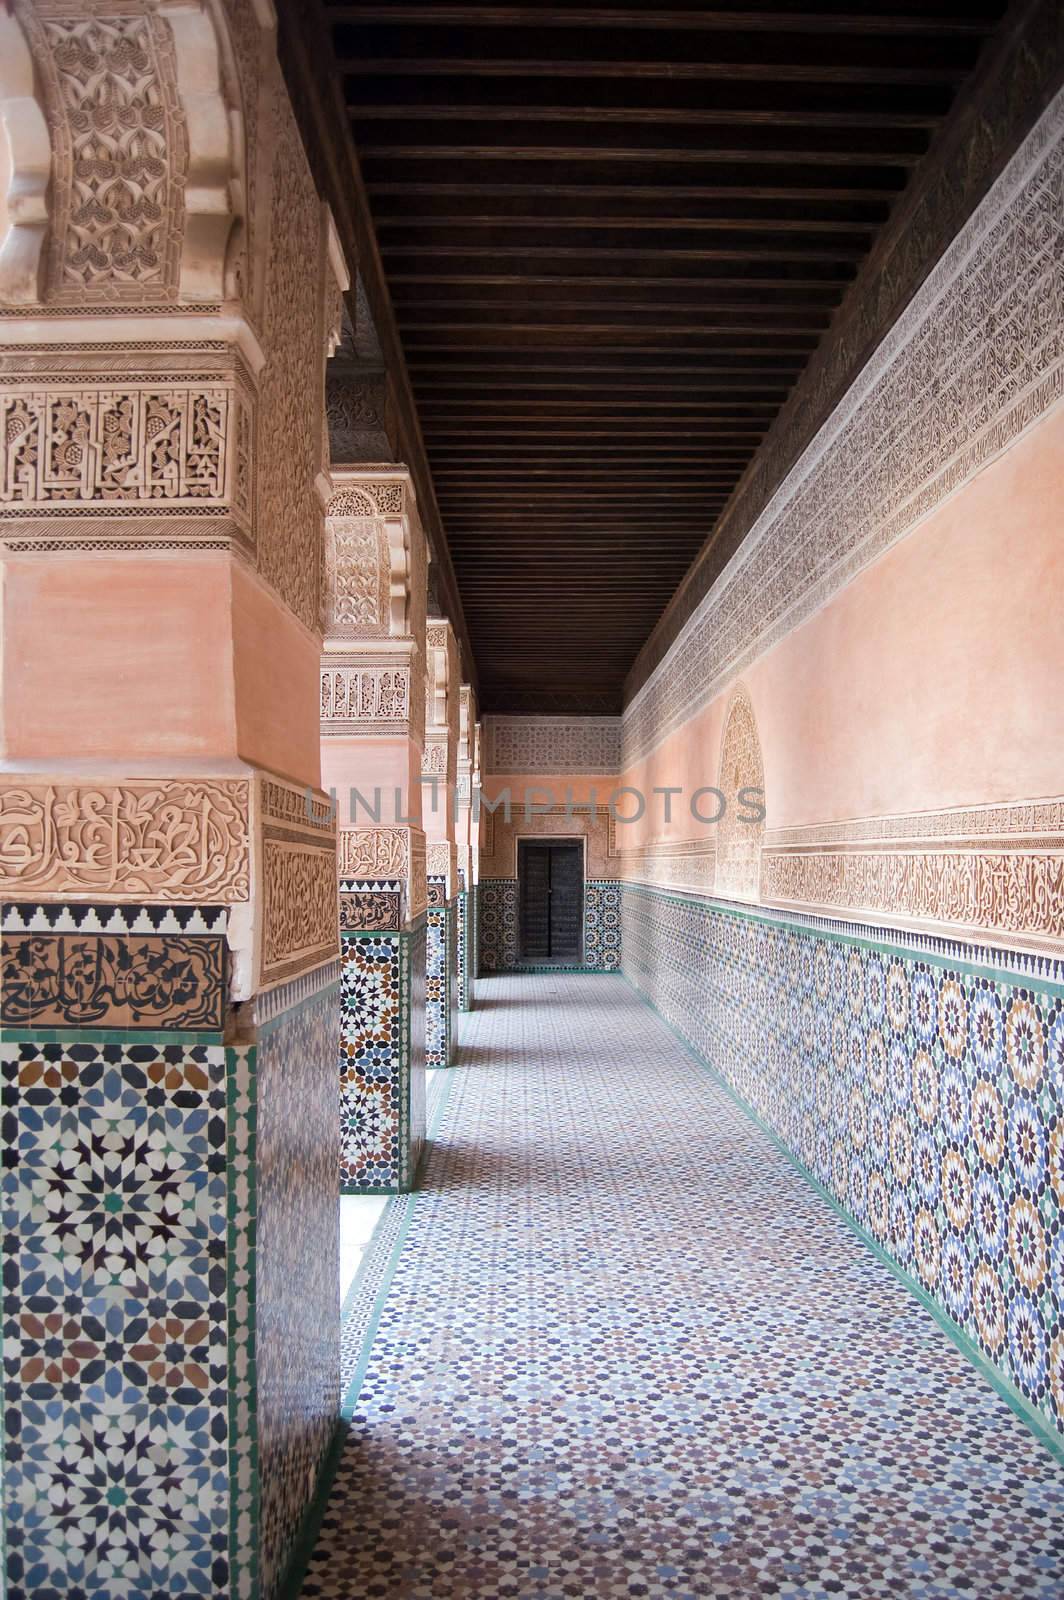 The Ben Youssef Medersa, an Islamic school attached to the Ben Youssef Mosquein in Marrakesh